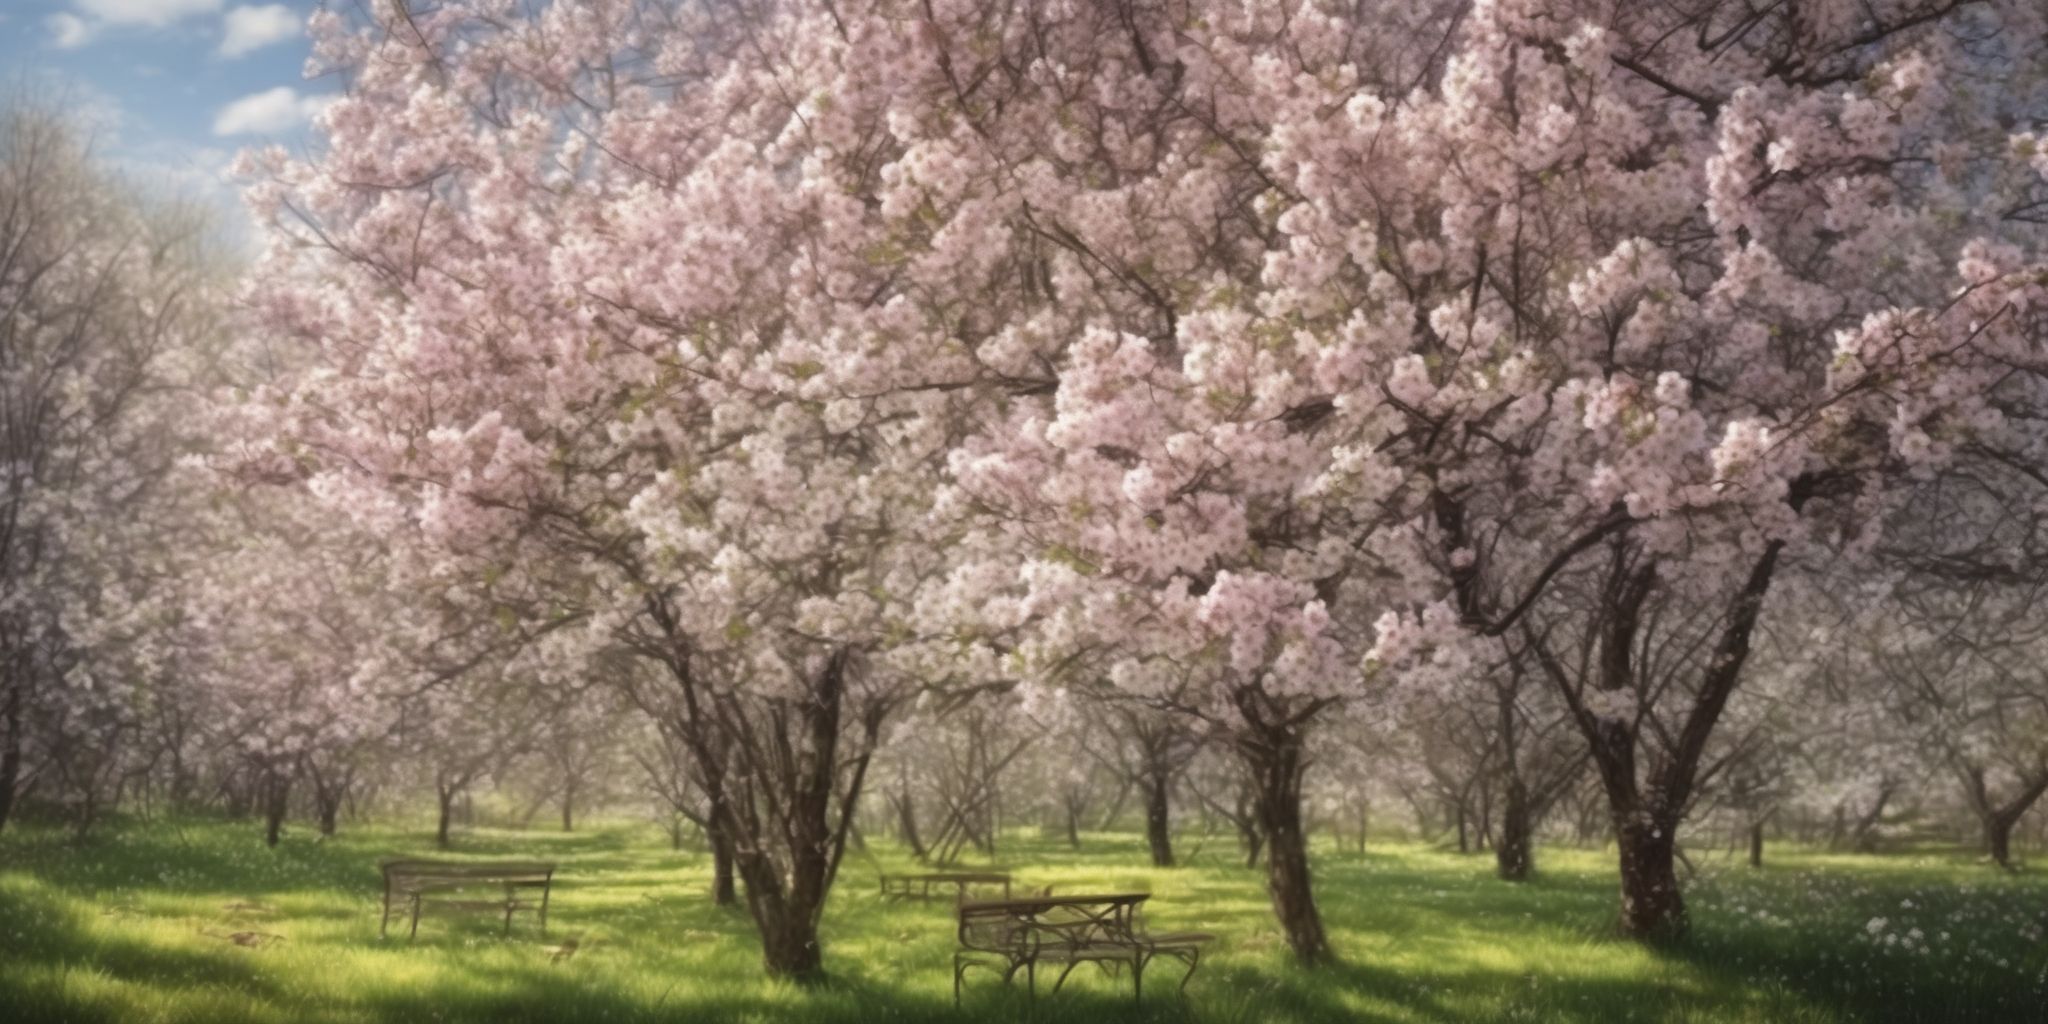 Spring  in realistic, photographic style